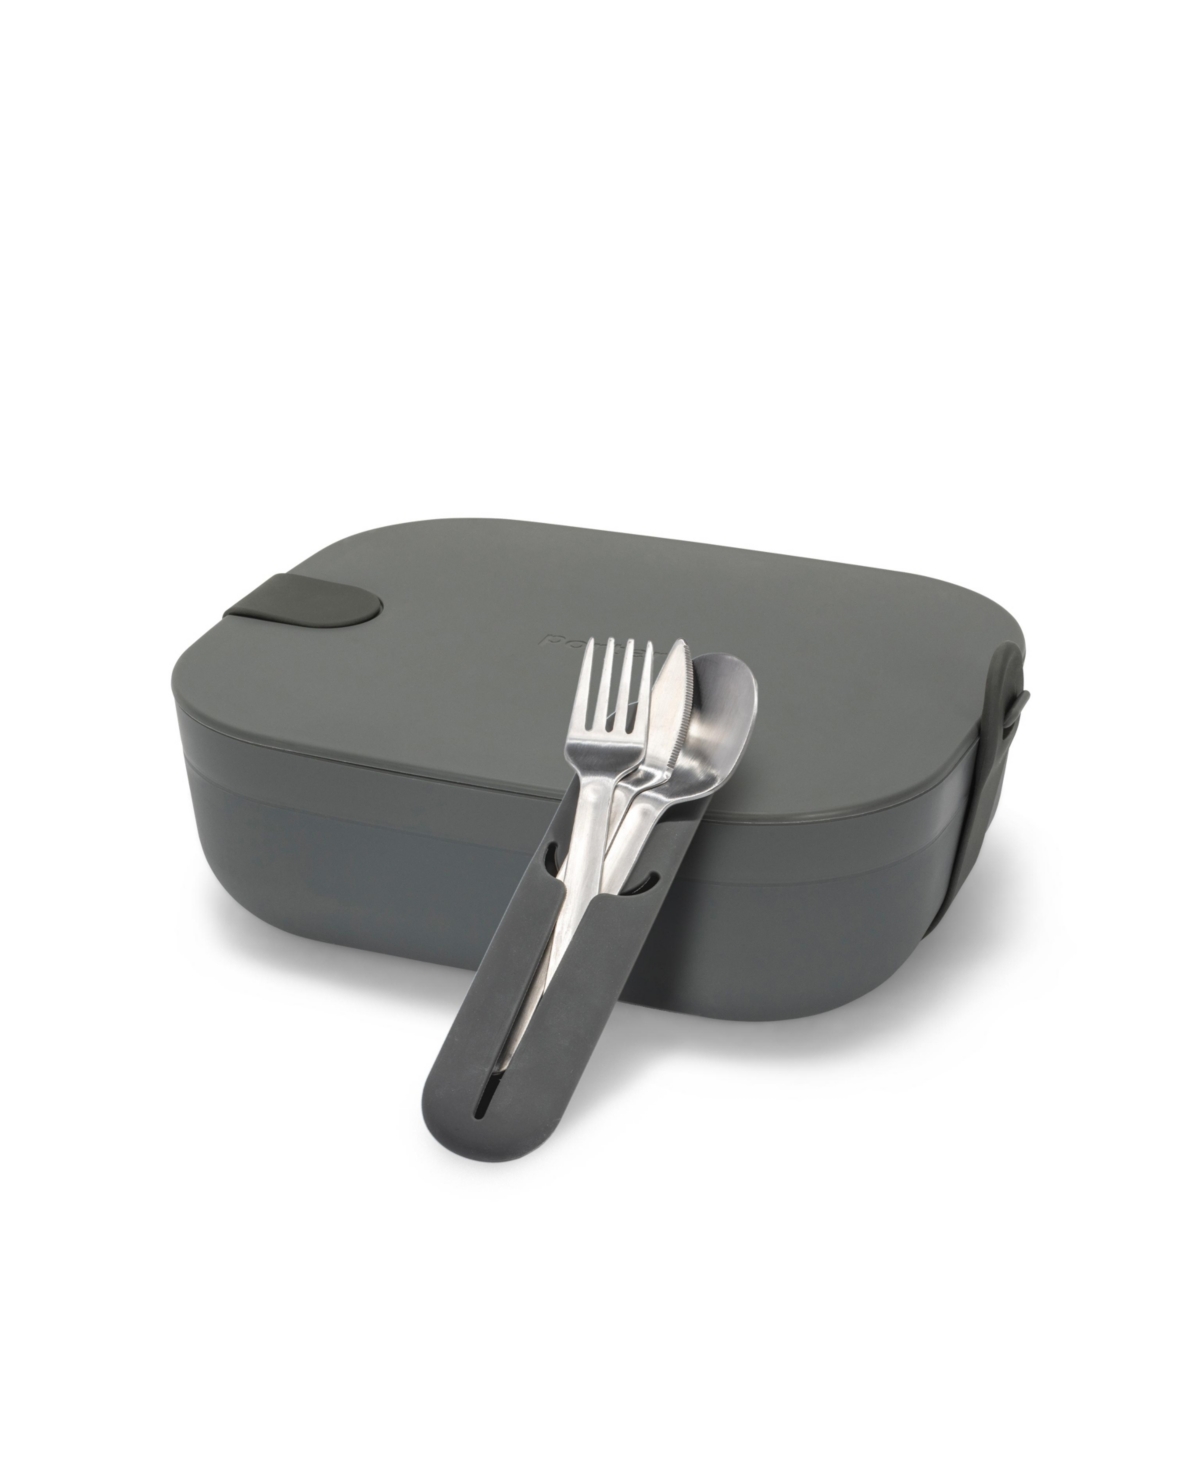 W & P Porter Lunch Box And Utensil Set In Charcoal